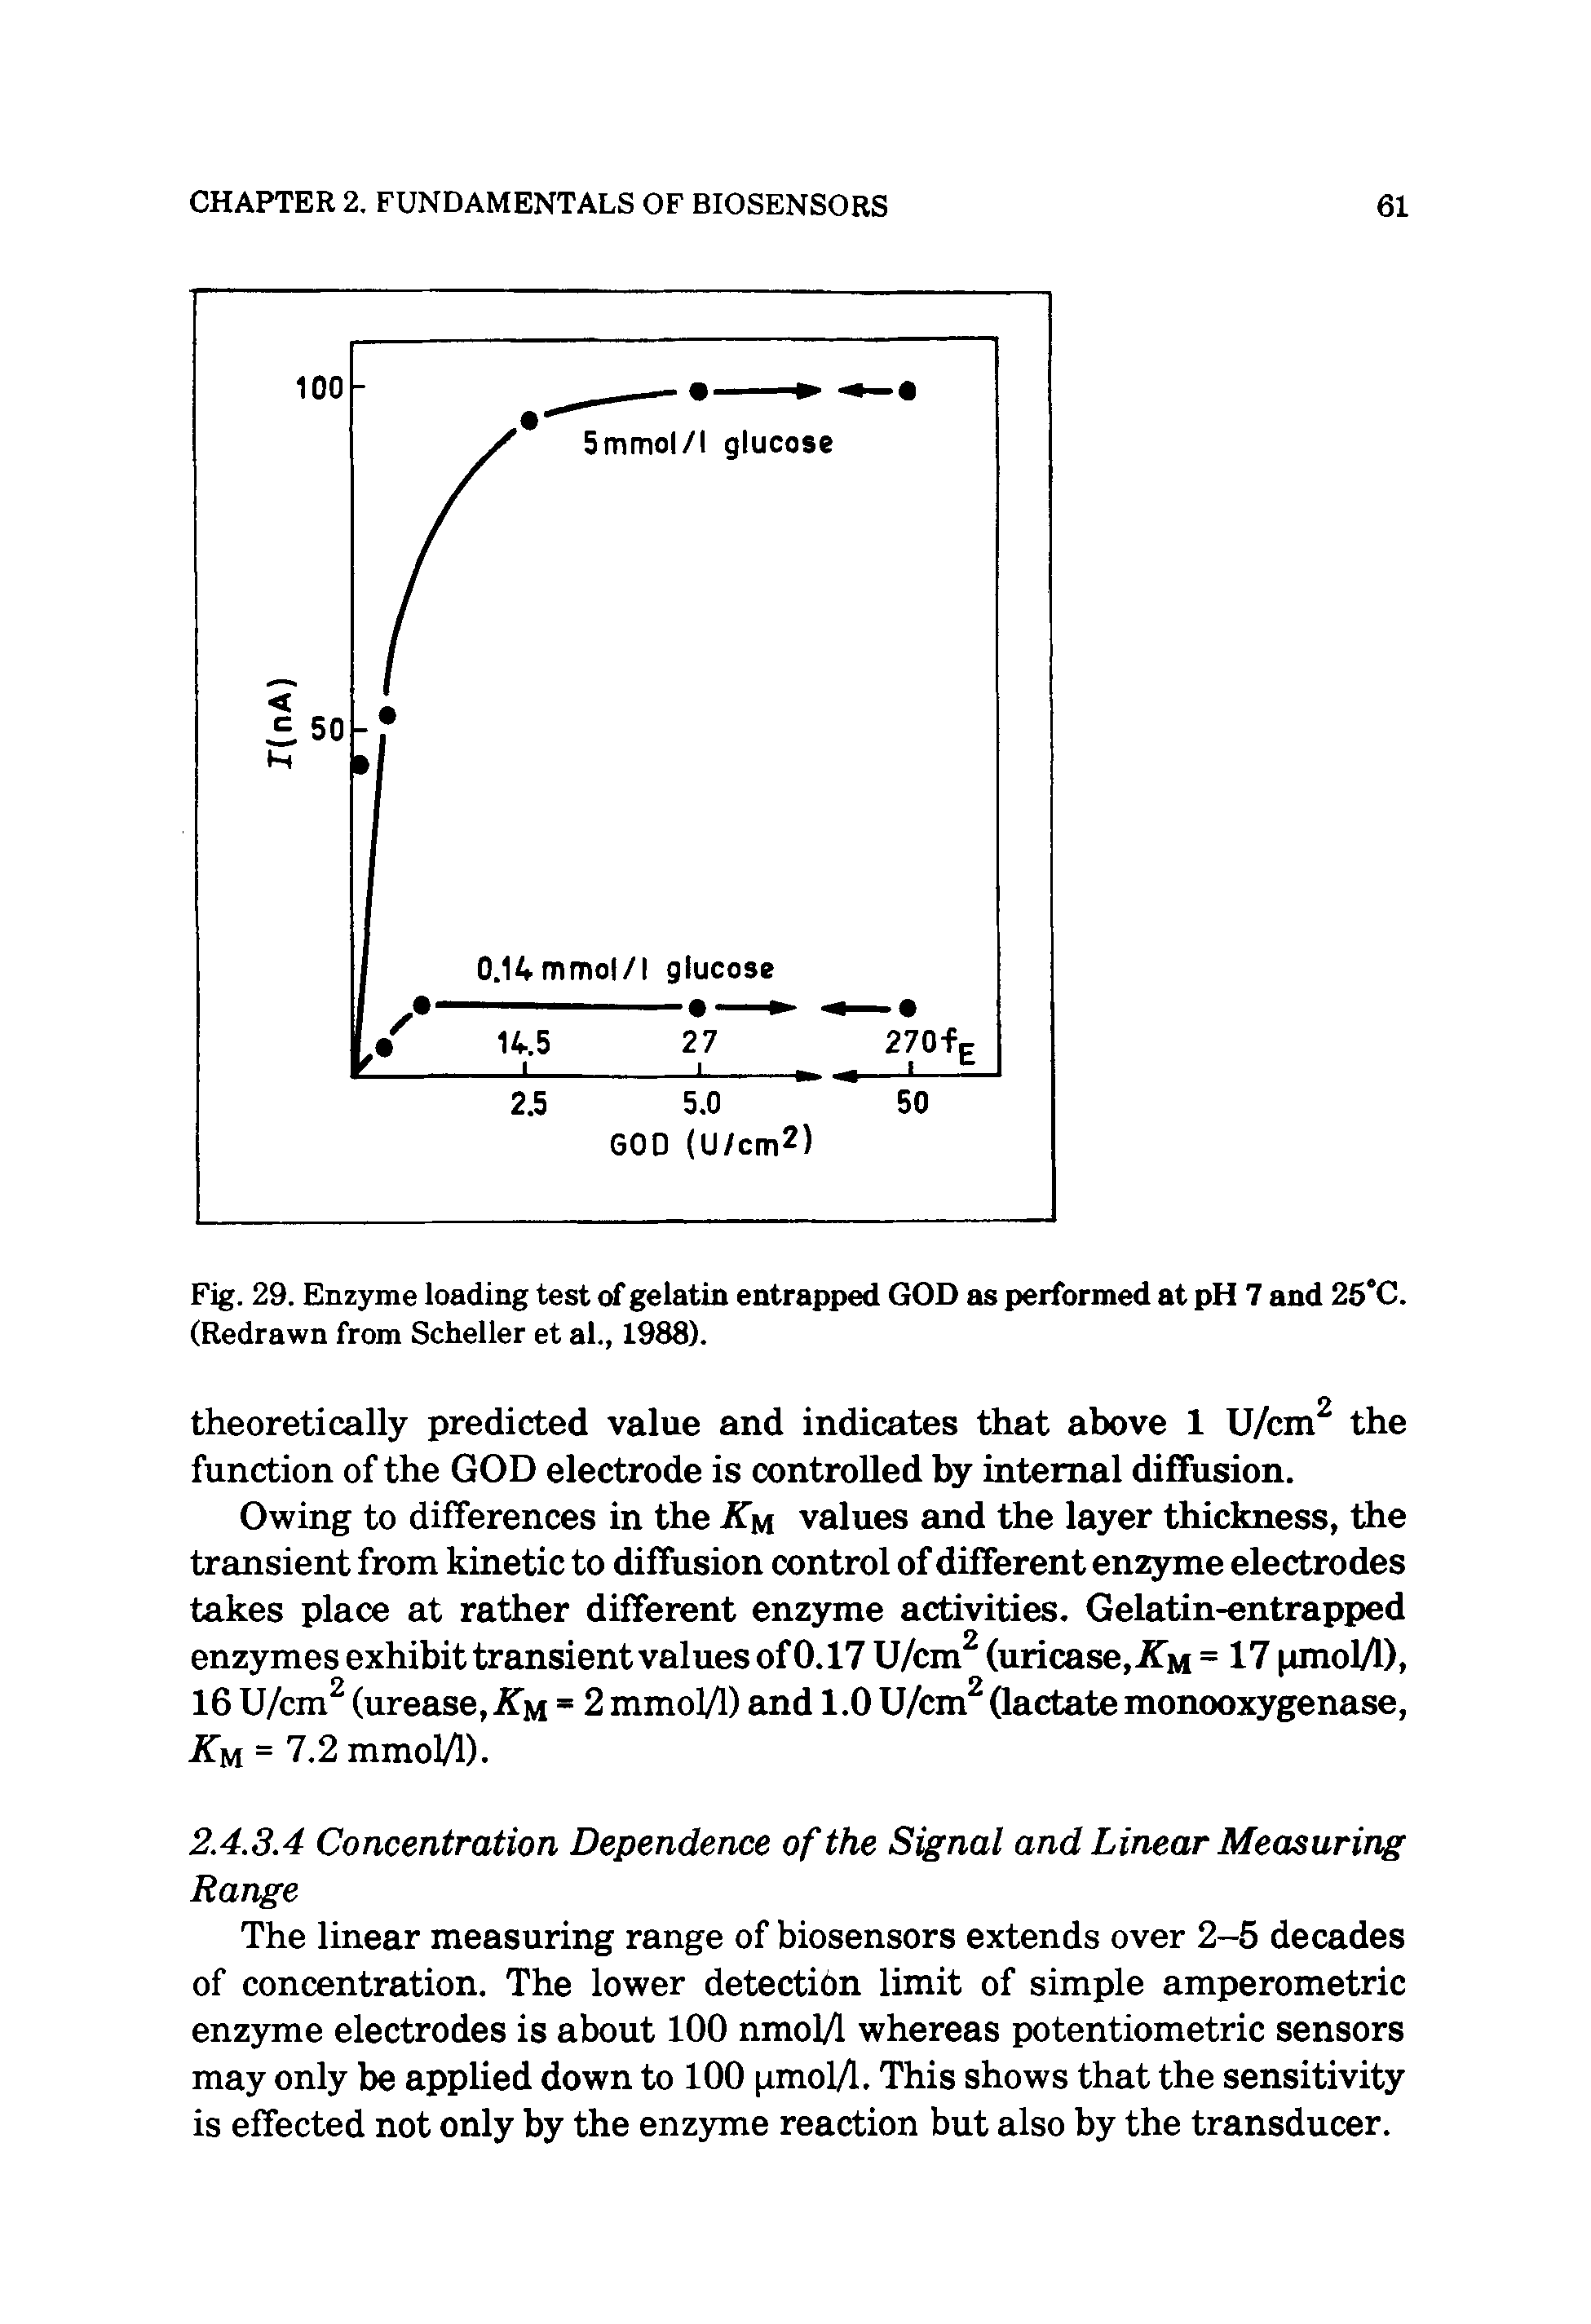 Fig. 29. Enzyme loading test of gelatin entrapped GOD as performed at pH 7 and 25°C. (Redrawn from Scheller et al., 1988).